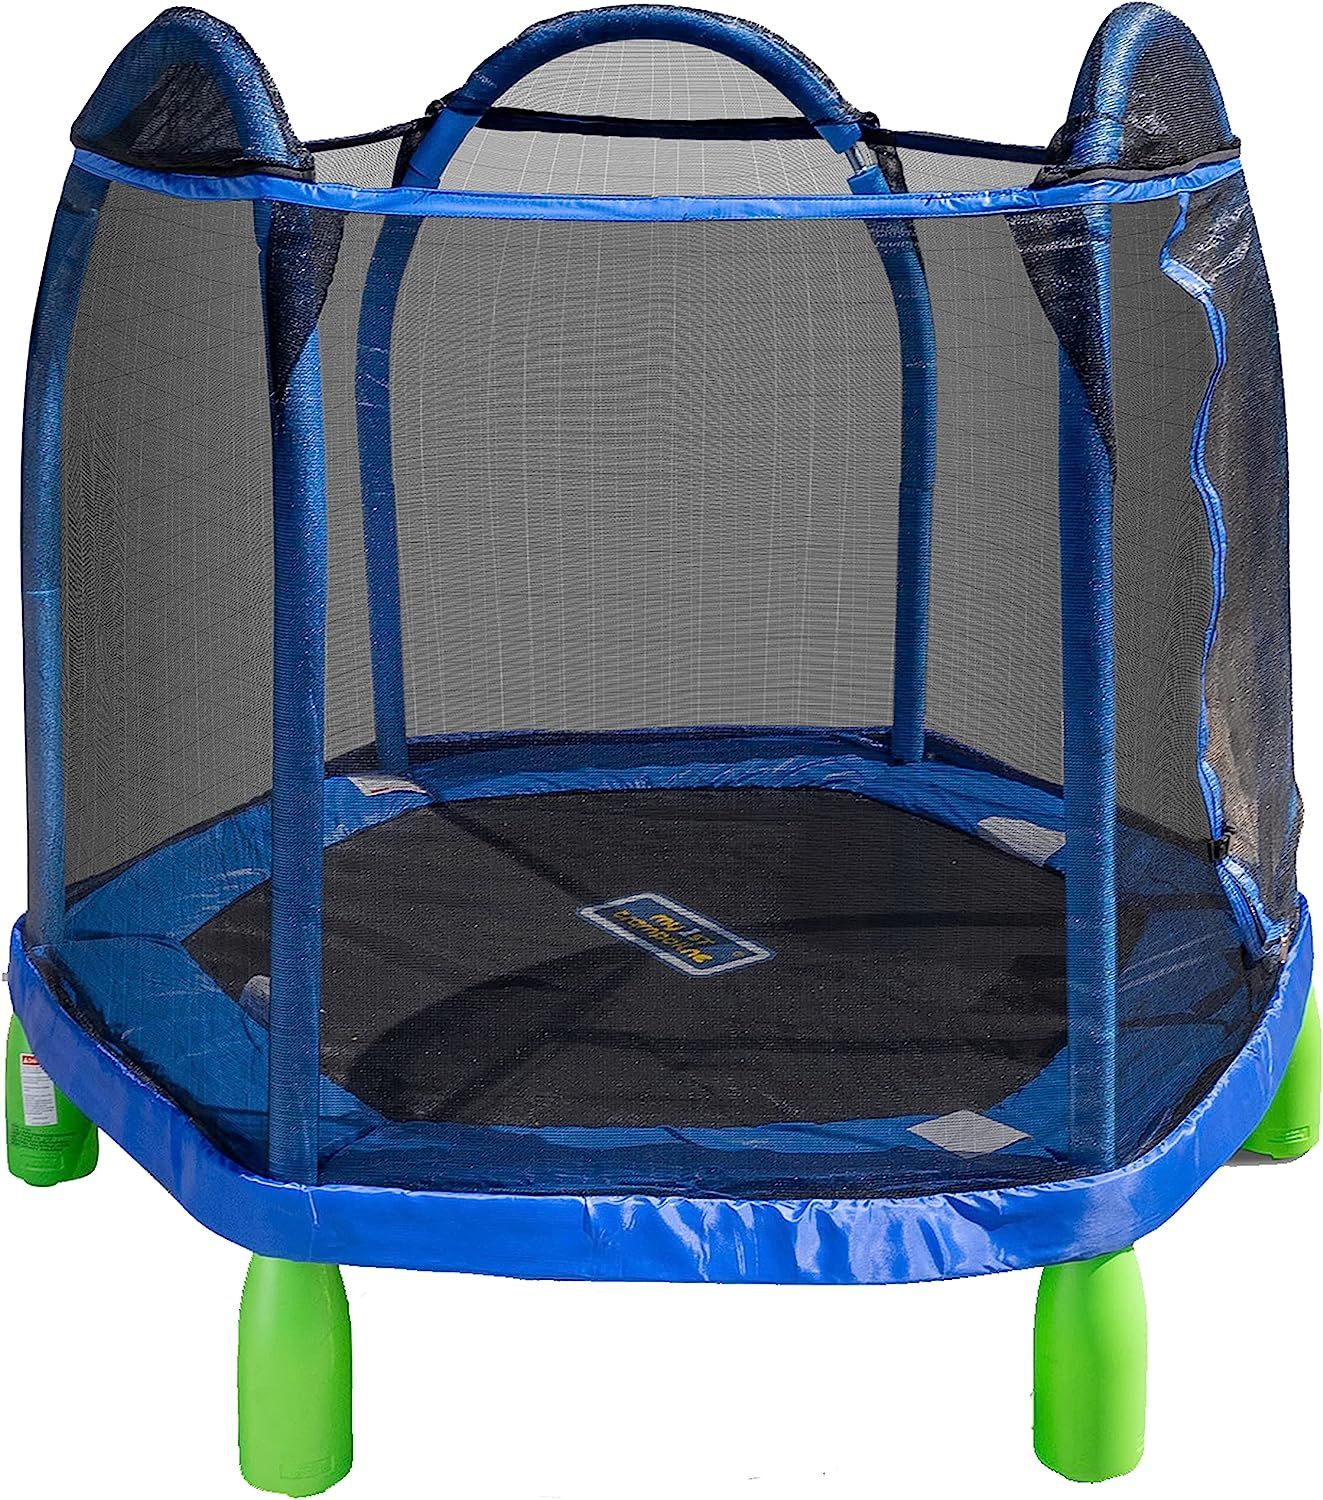 Sportspower Kid's Outdoor My First Trampoline with Zippered Safety Net Enclosure, 7FT, Blue/Green | Amazon (US)